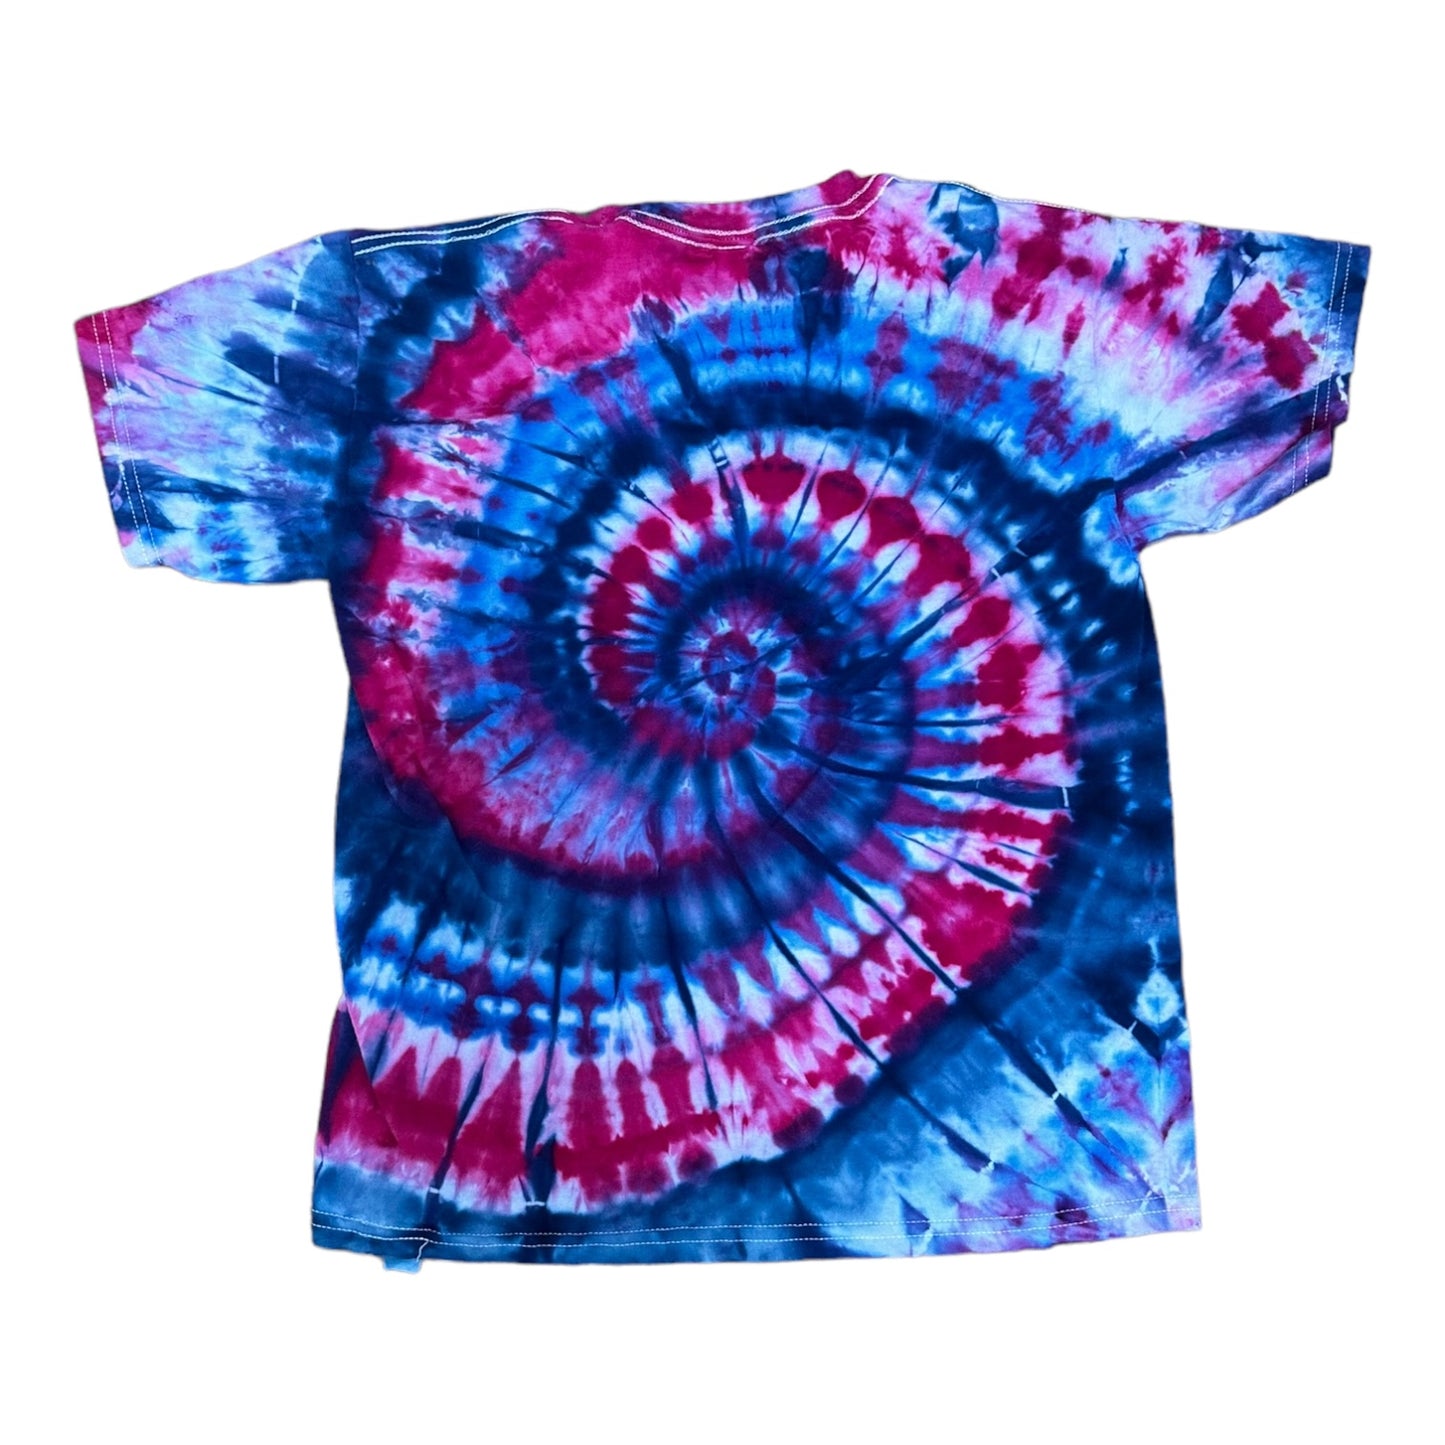 Youth XL Blue Purple and Pink Spiral Ice Dye Tie Dye Shirt